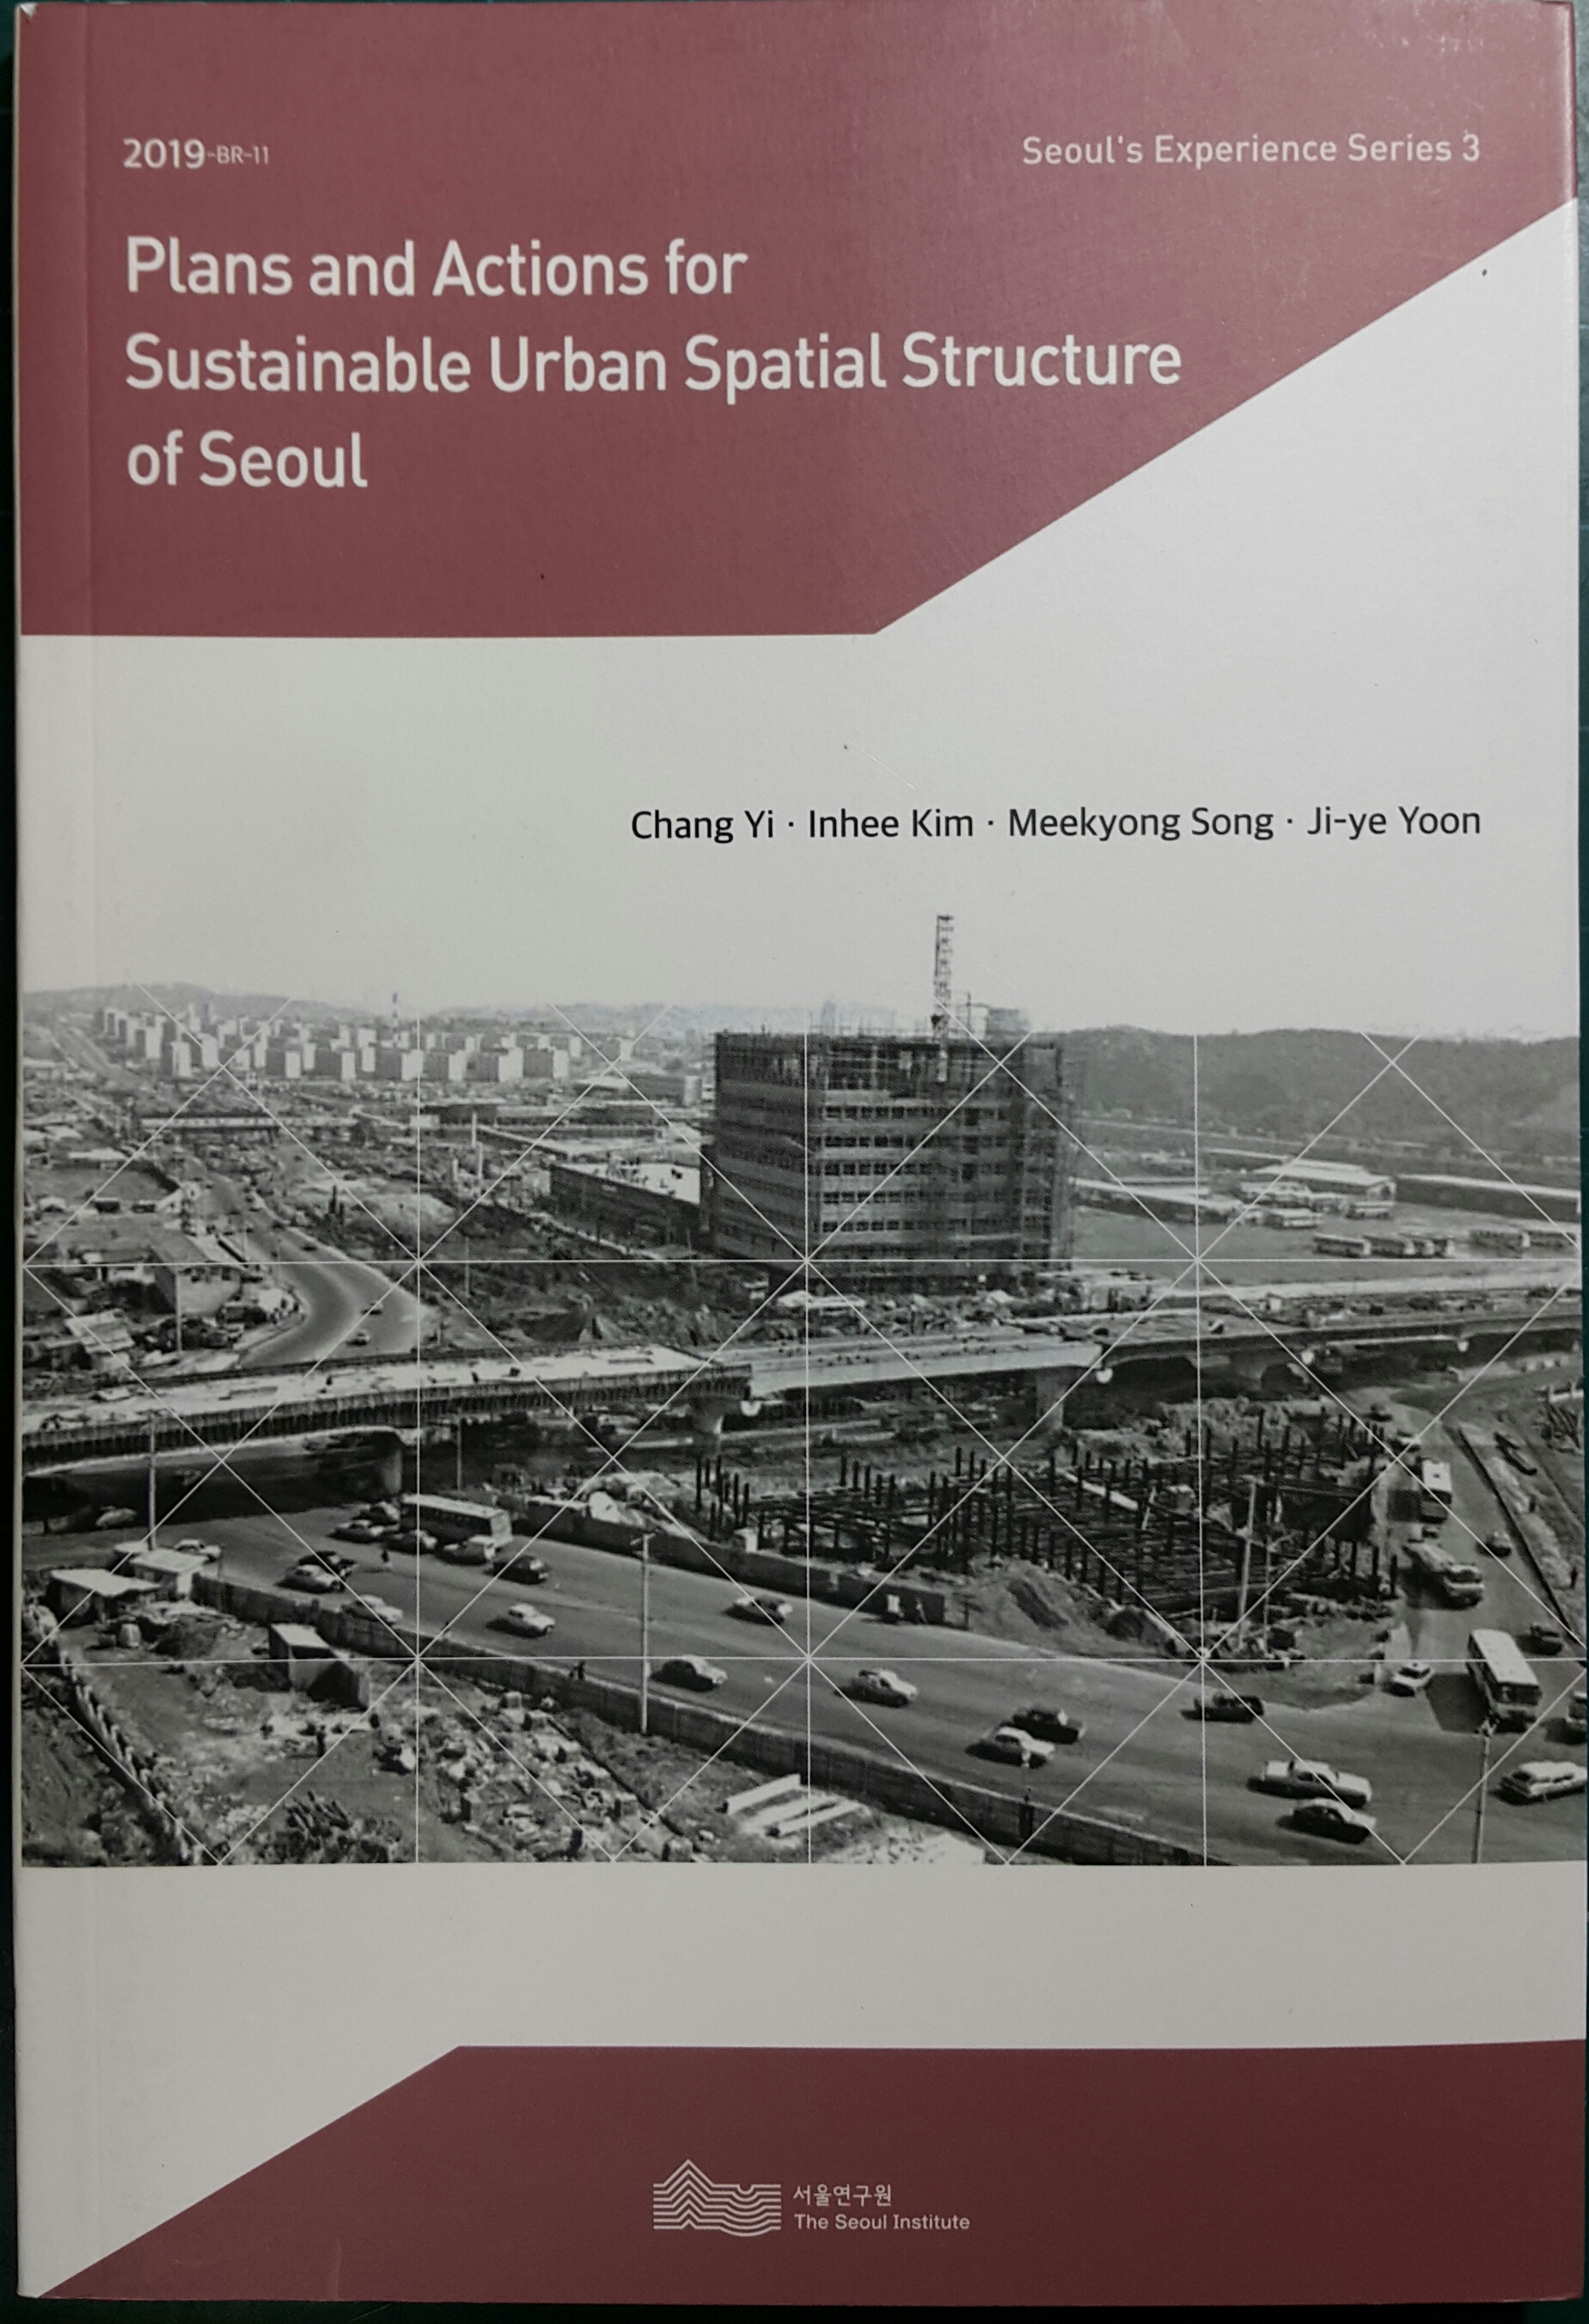 Plans and Actions for Sustainable Urban Spatial Structure of Seoul